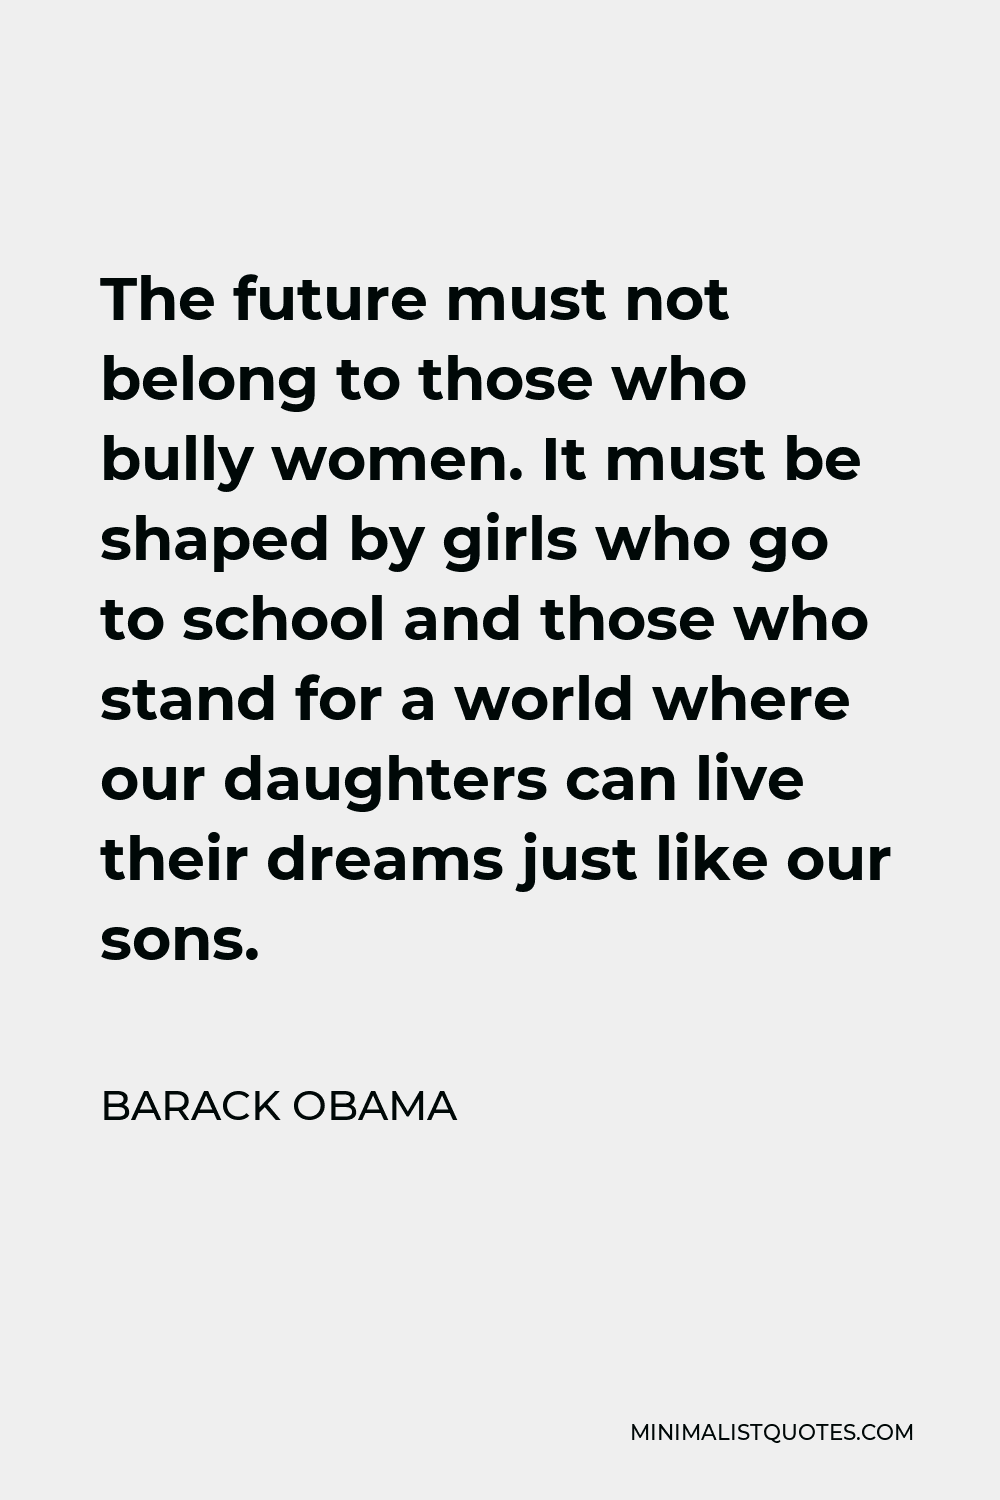 Barack Obama Quote - The future must not belong to those who bully women. It must be shaped by girls who go to school and those who stand for a world where our daughters can live their dreams just like our sons.